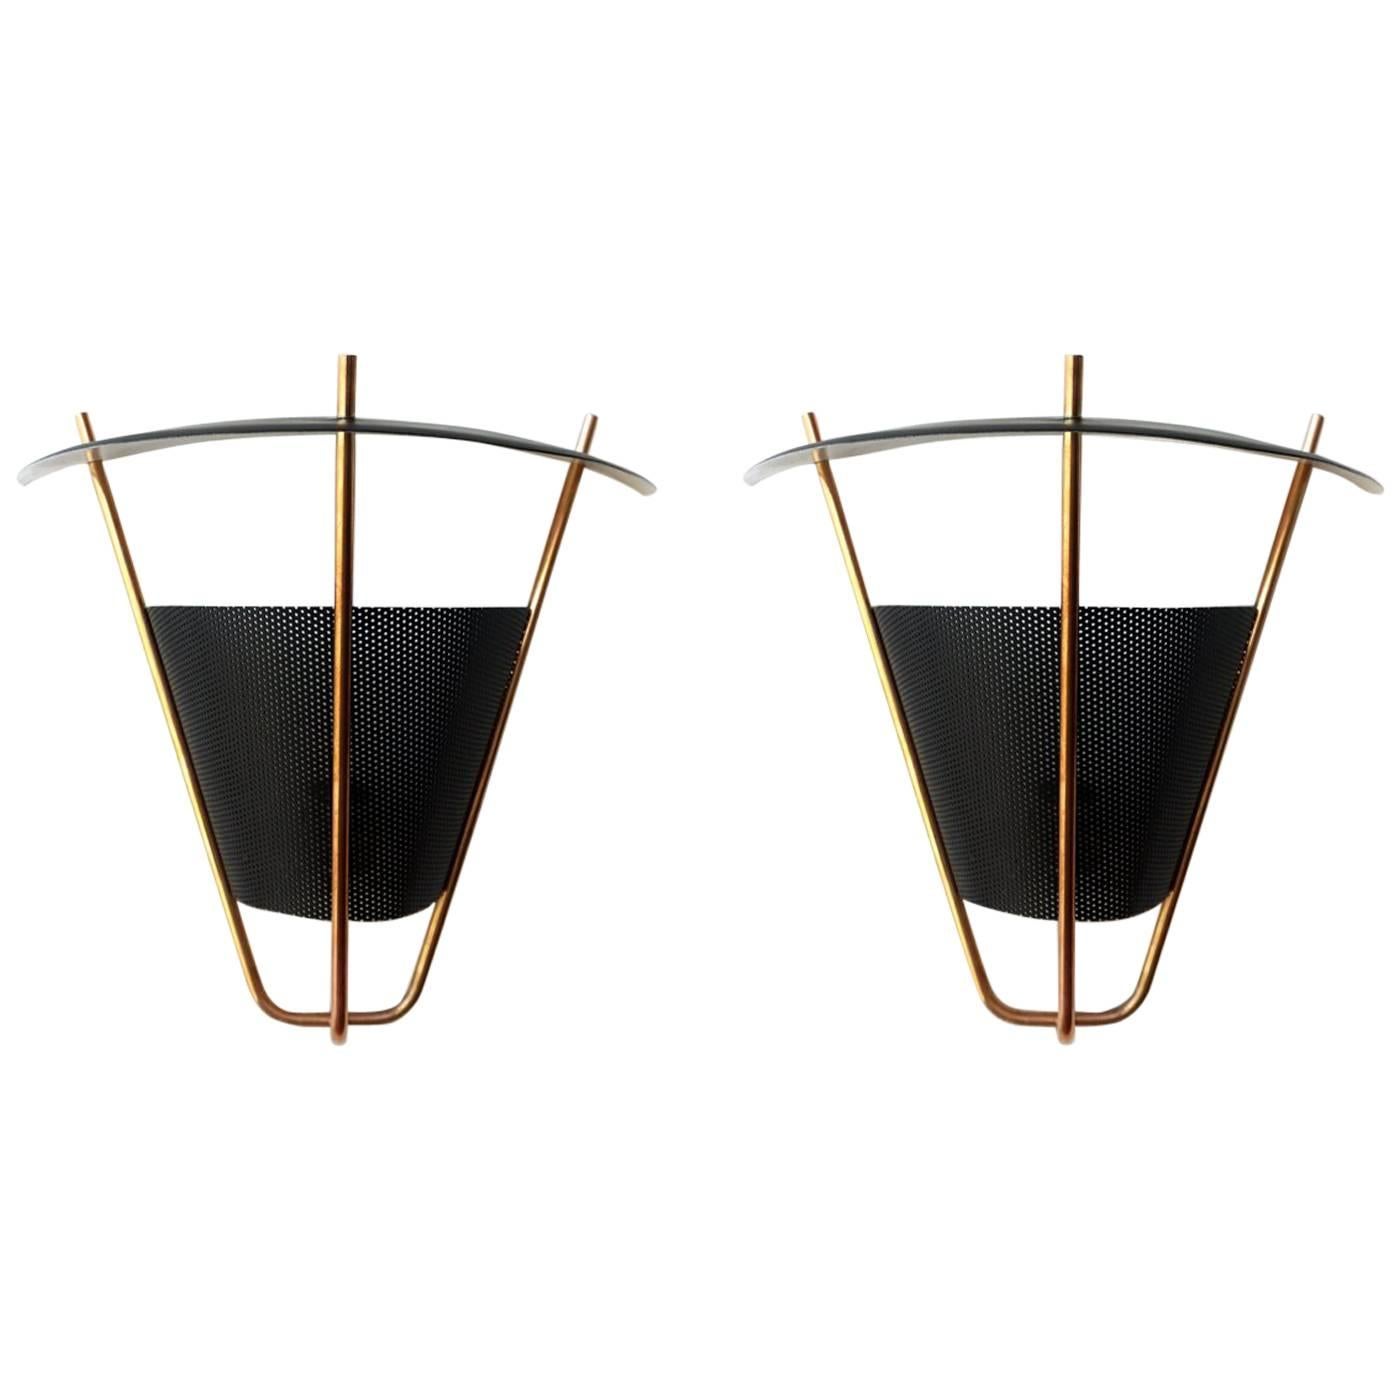 1950s Perforated Metal and Brass Wall Sconces by Lightolier